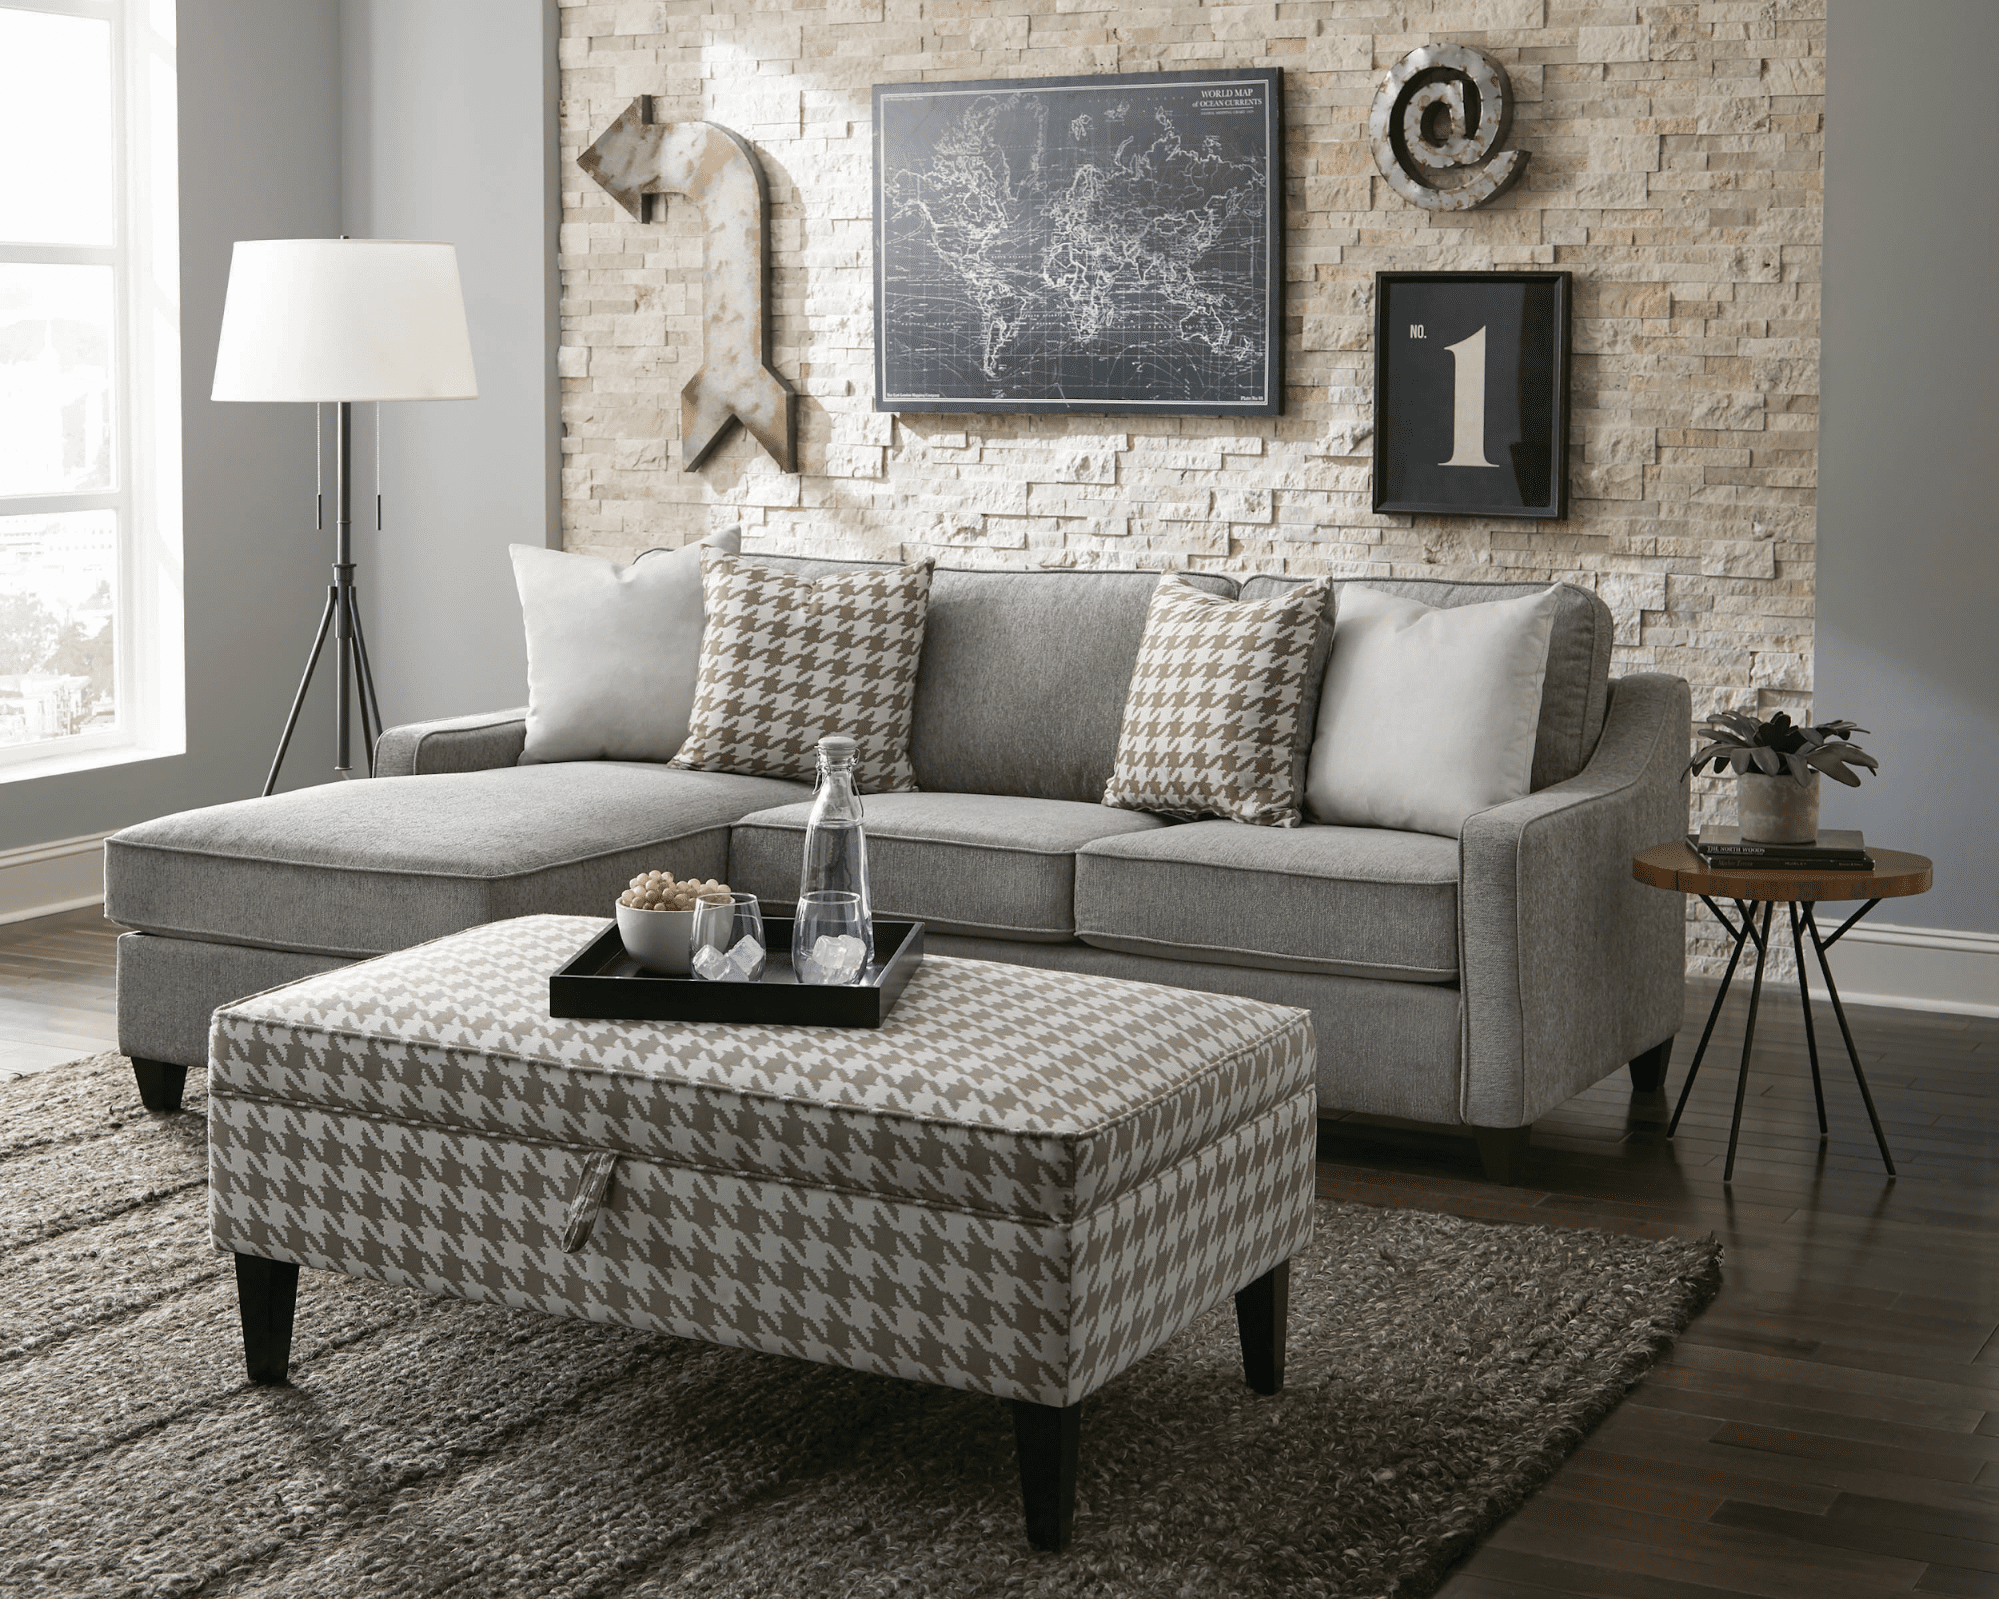 How To Pick A Small Sectional Sofa For A Small Space – Coast Intended For Sofas For Small Spaces (View 11 of 15)